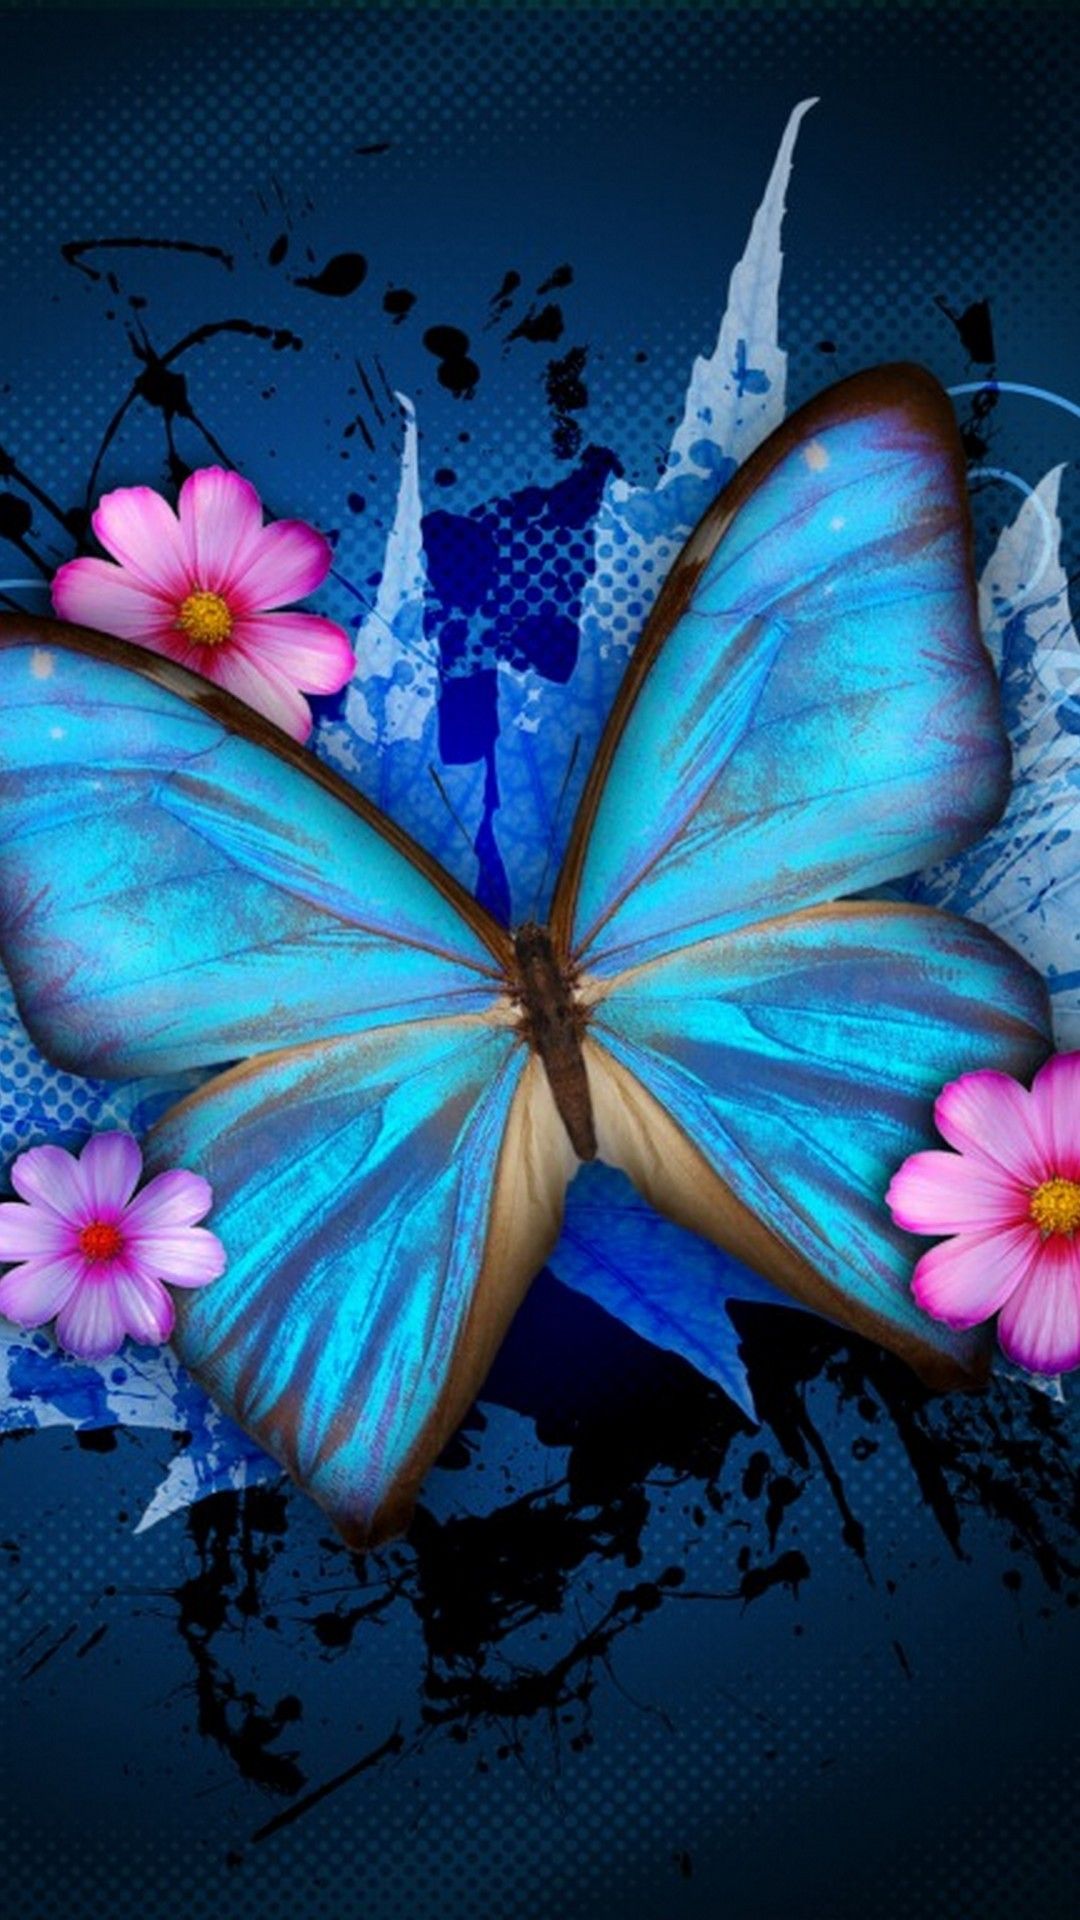 Cute Butterfly Wallpapers For Mobile Phones Wallpapers